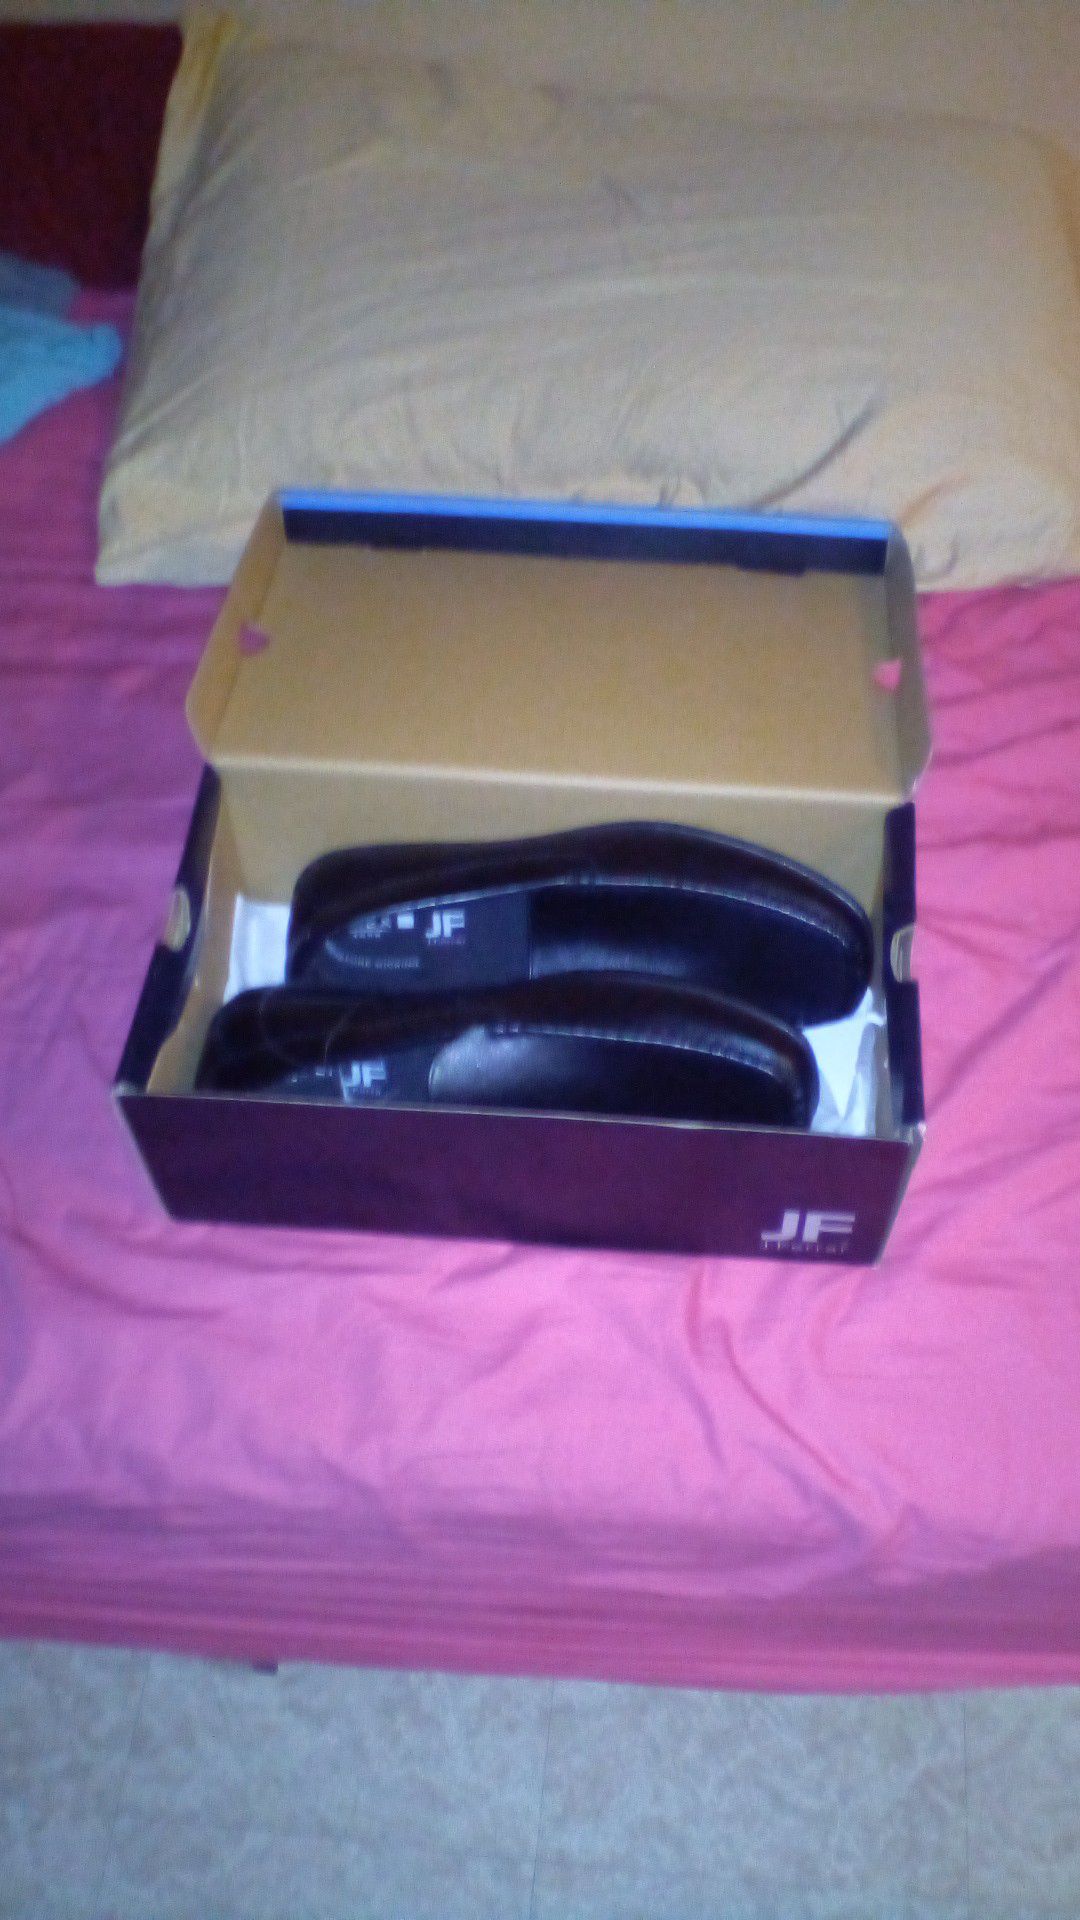 JF Shoes memory flex form shoes 60.00 new in box with tag will sell for 30 or best offer size 11 mediums